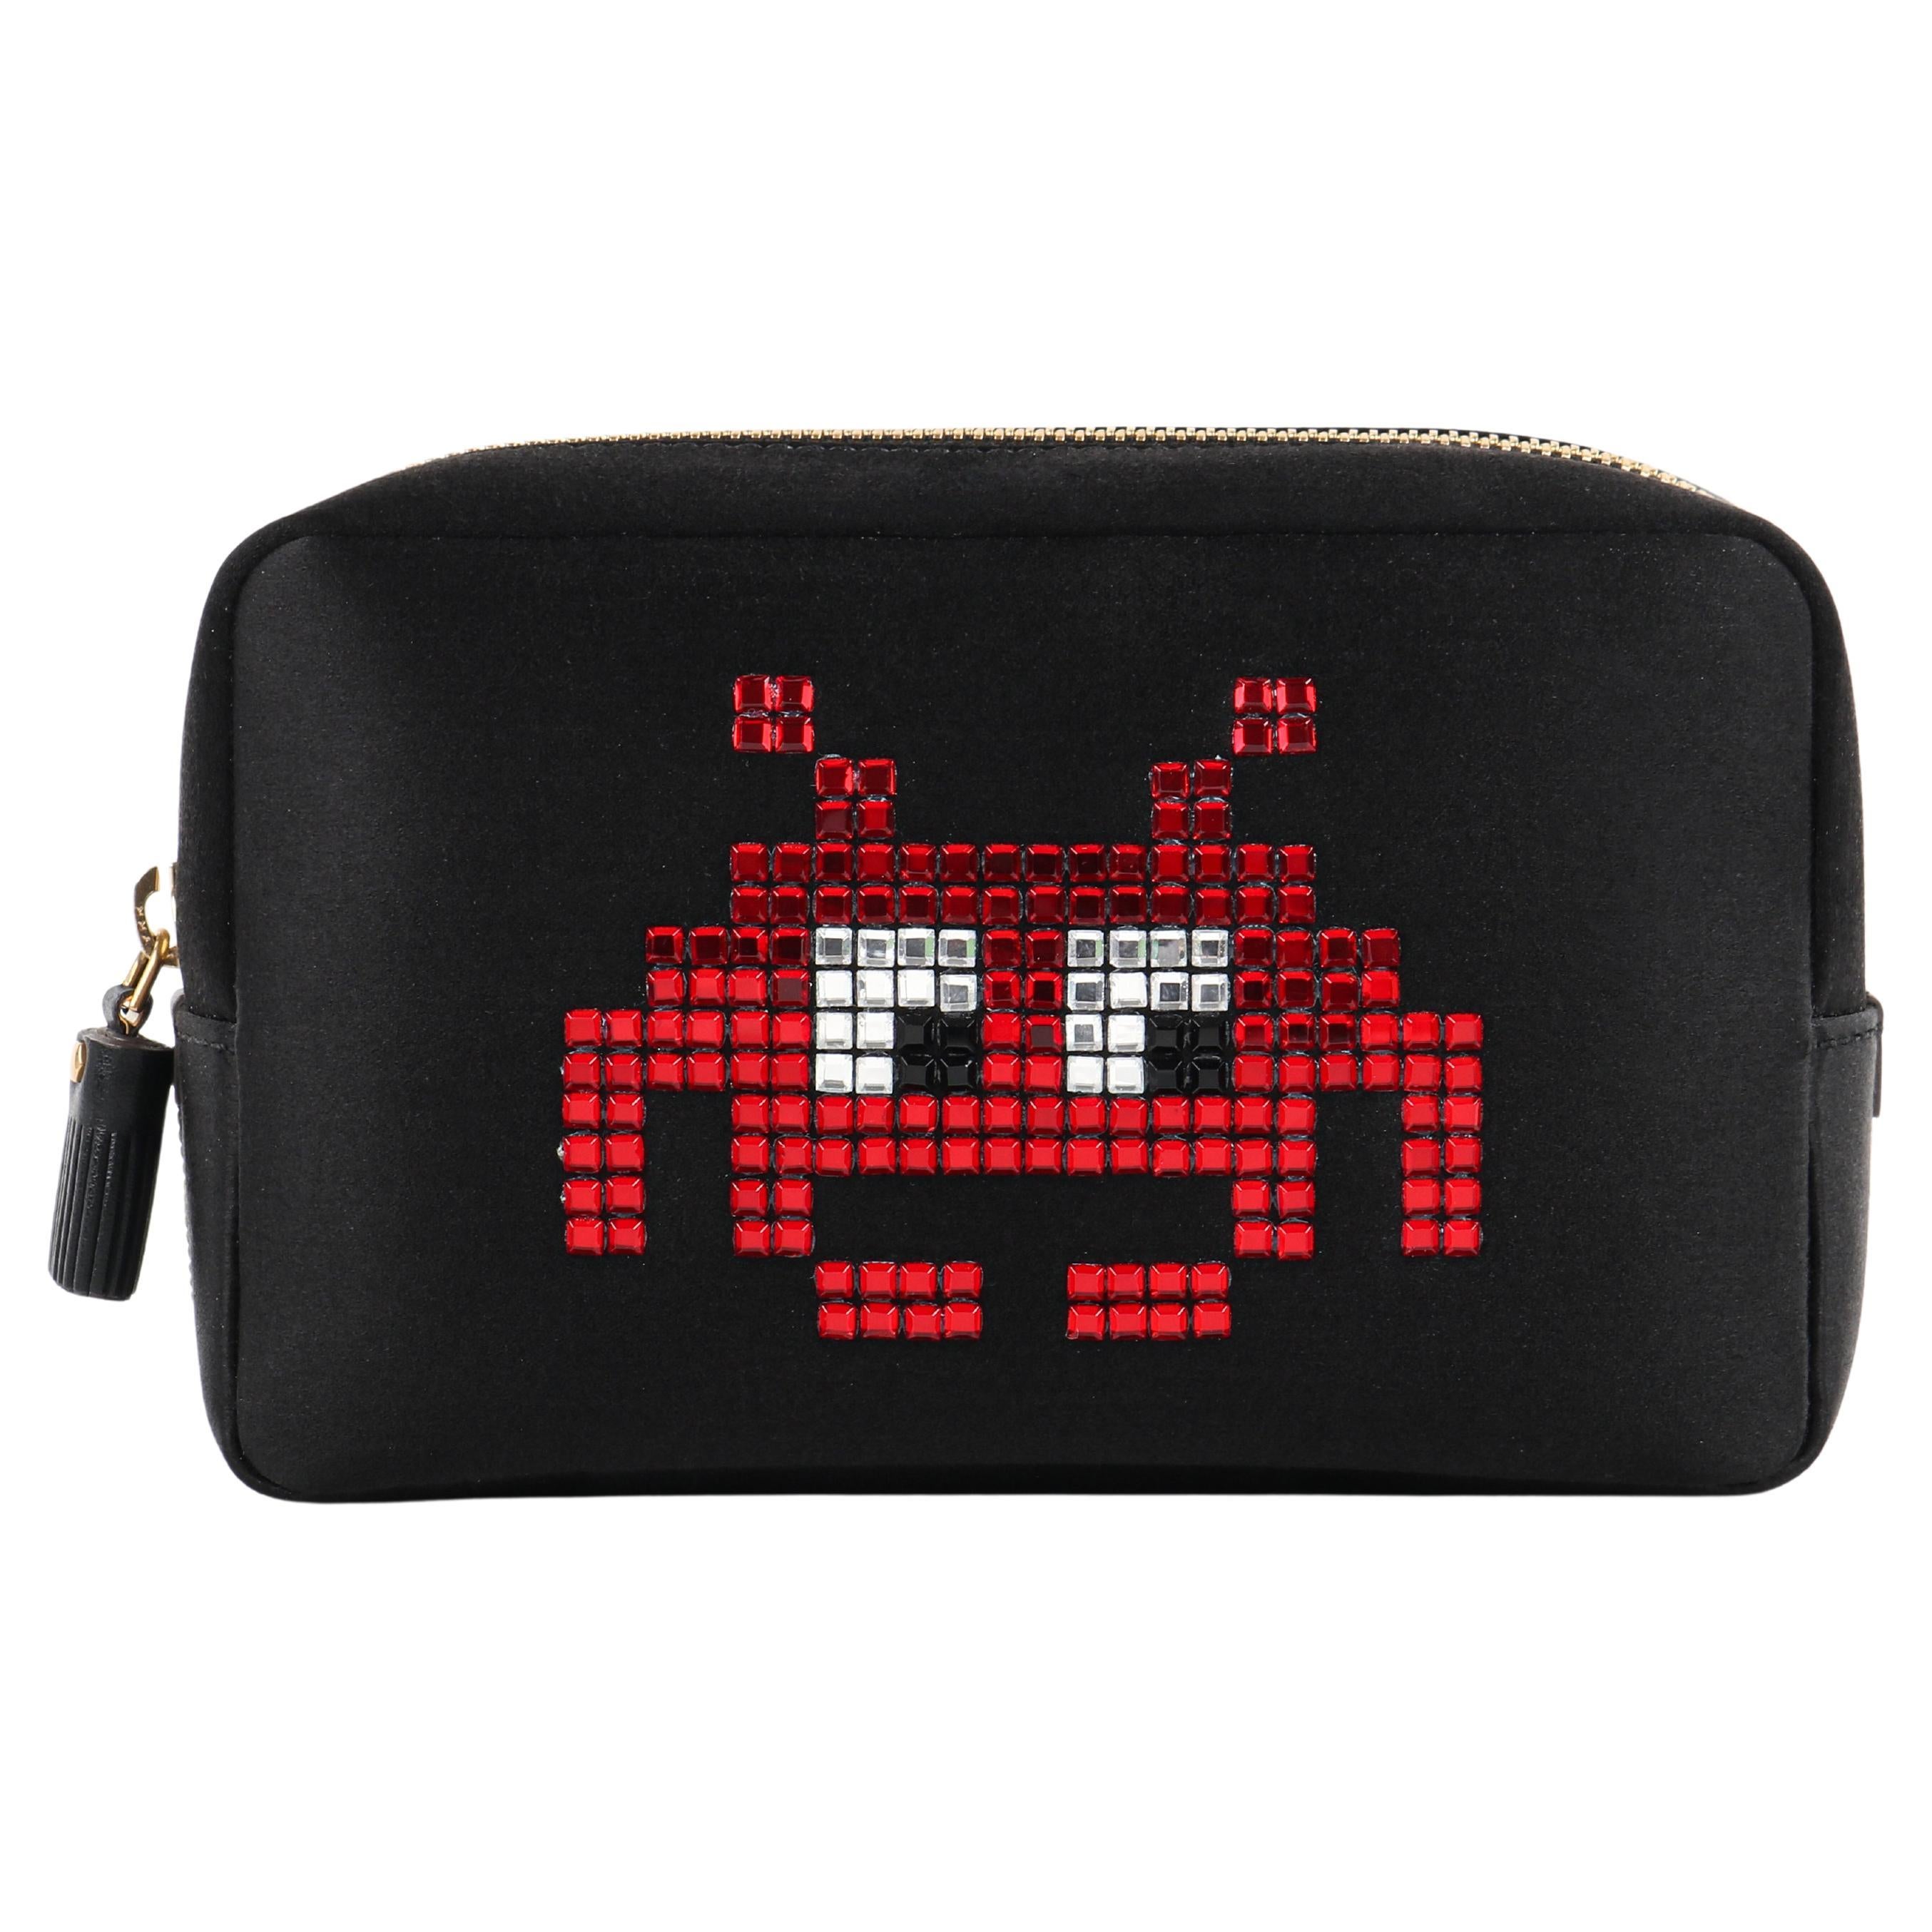 ANYA HINDMARCH F/W 2016 "Space Invasion" Black Red Embellished Cosmetic Bag NWT For Sale